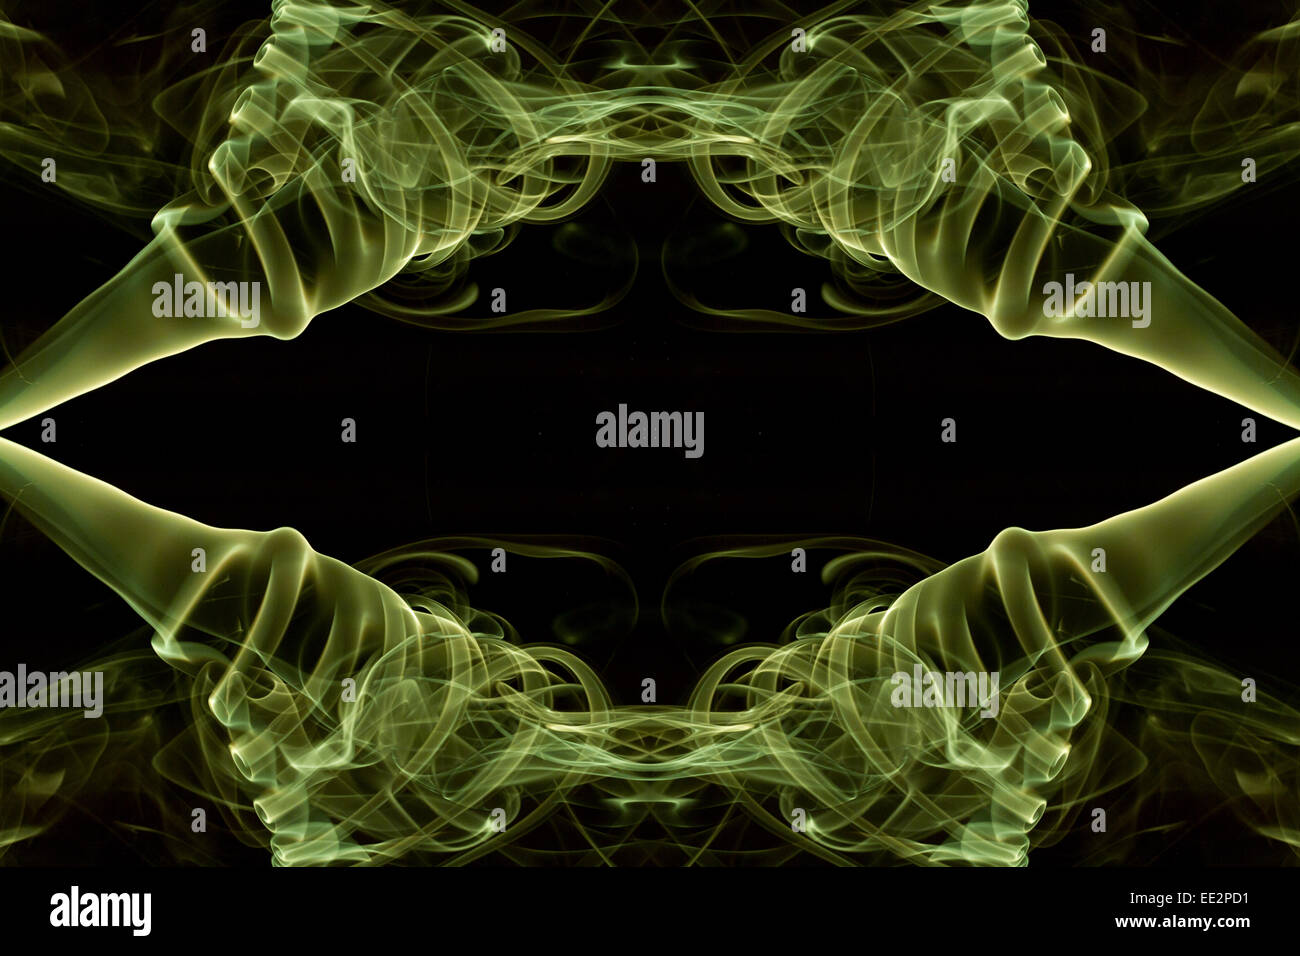 Reflected and mirrored symmetrical lime green smoke pattern against a black background. Stock Photo